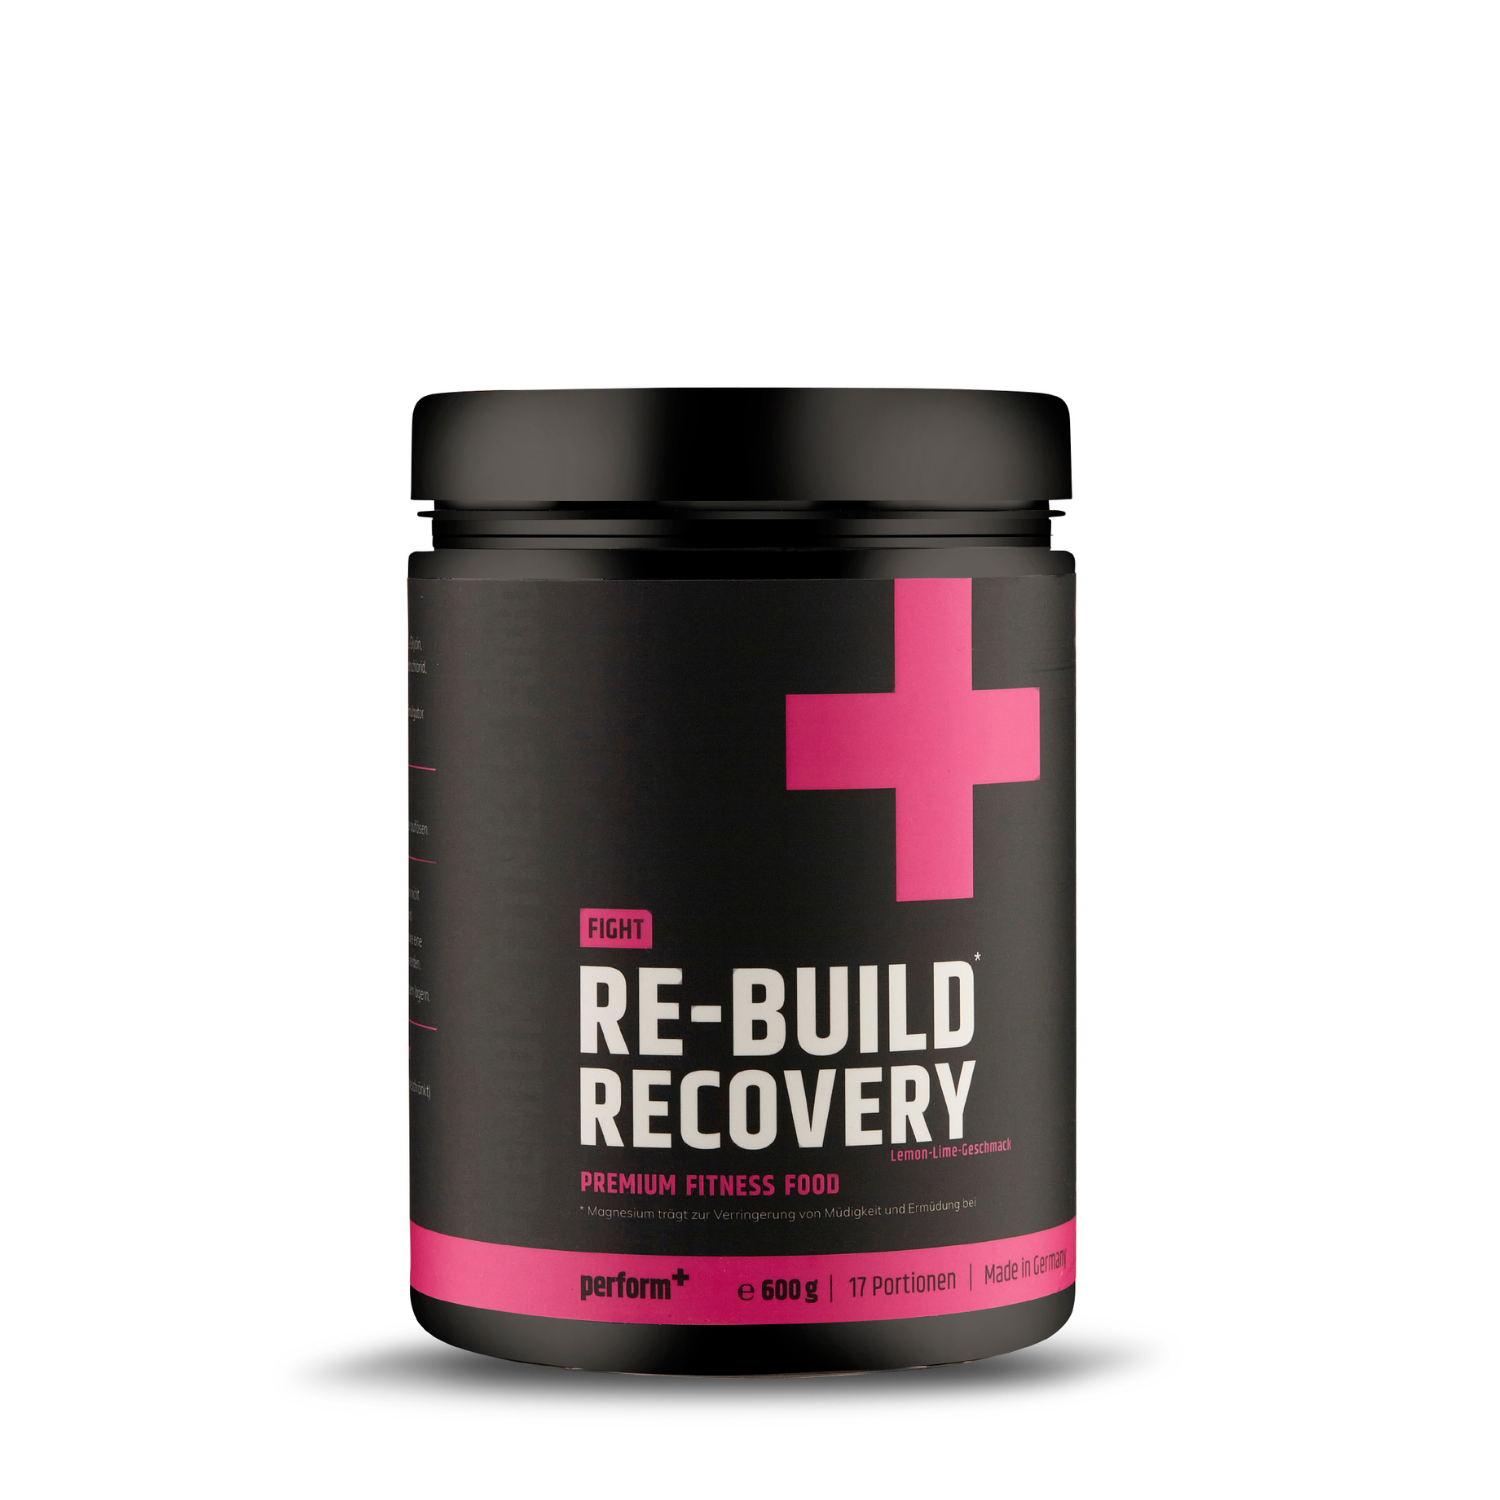 Re-Build Recovery